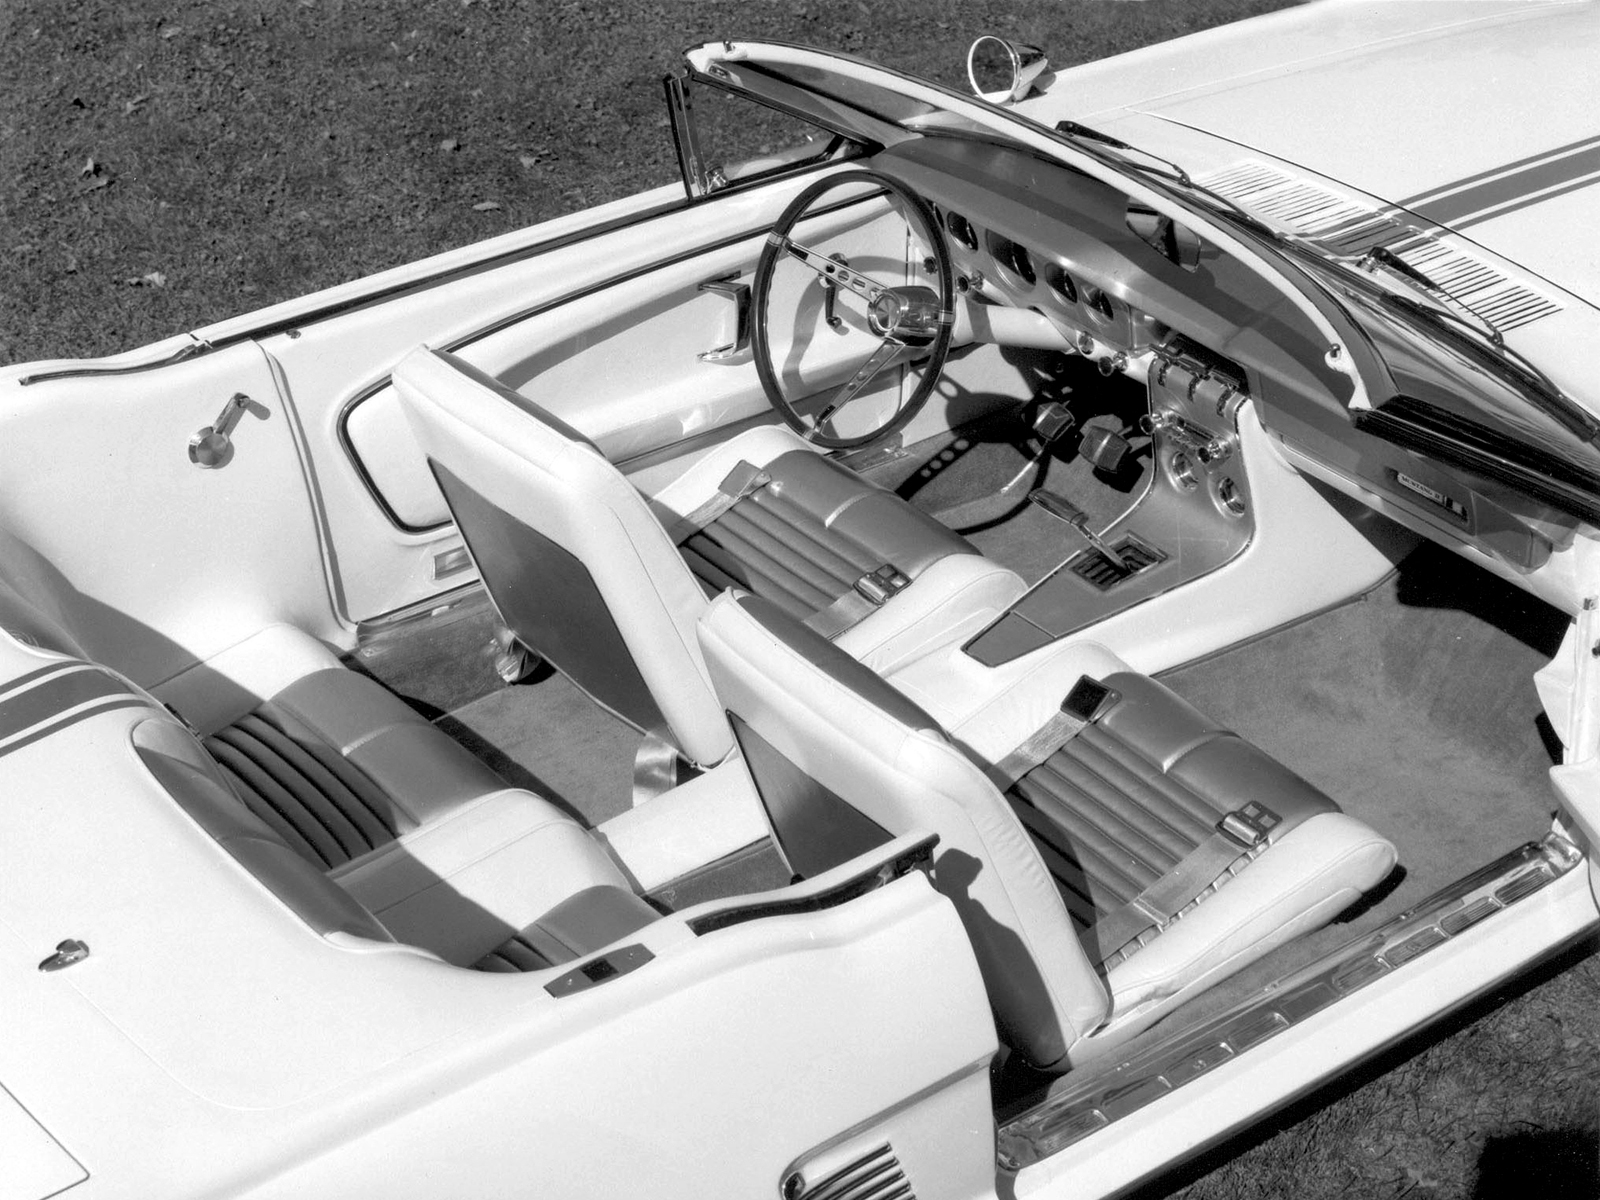 Ford Mustang II Prototype, 1963 - Interior